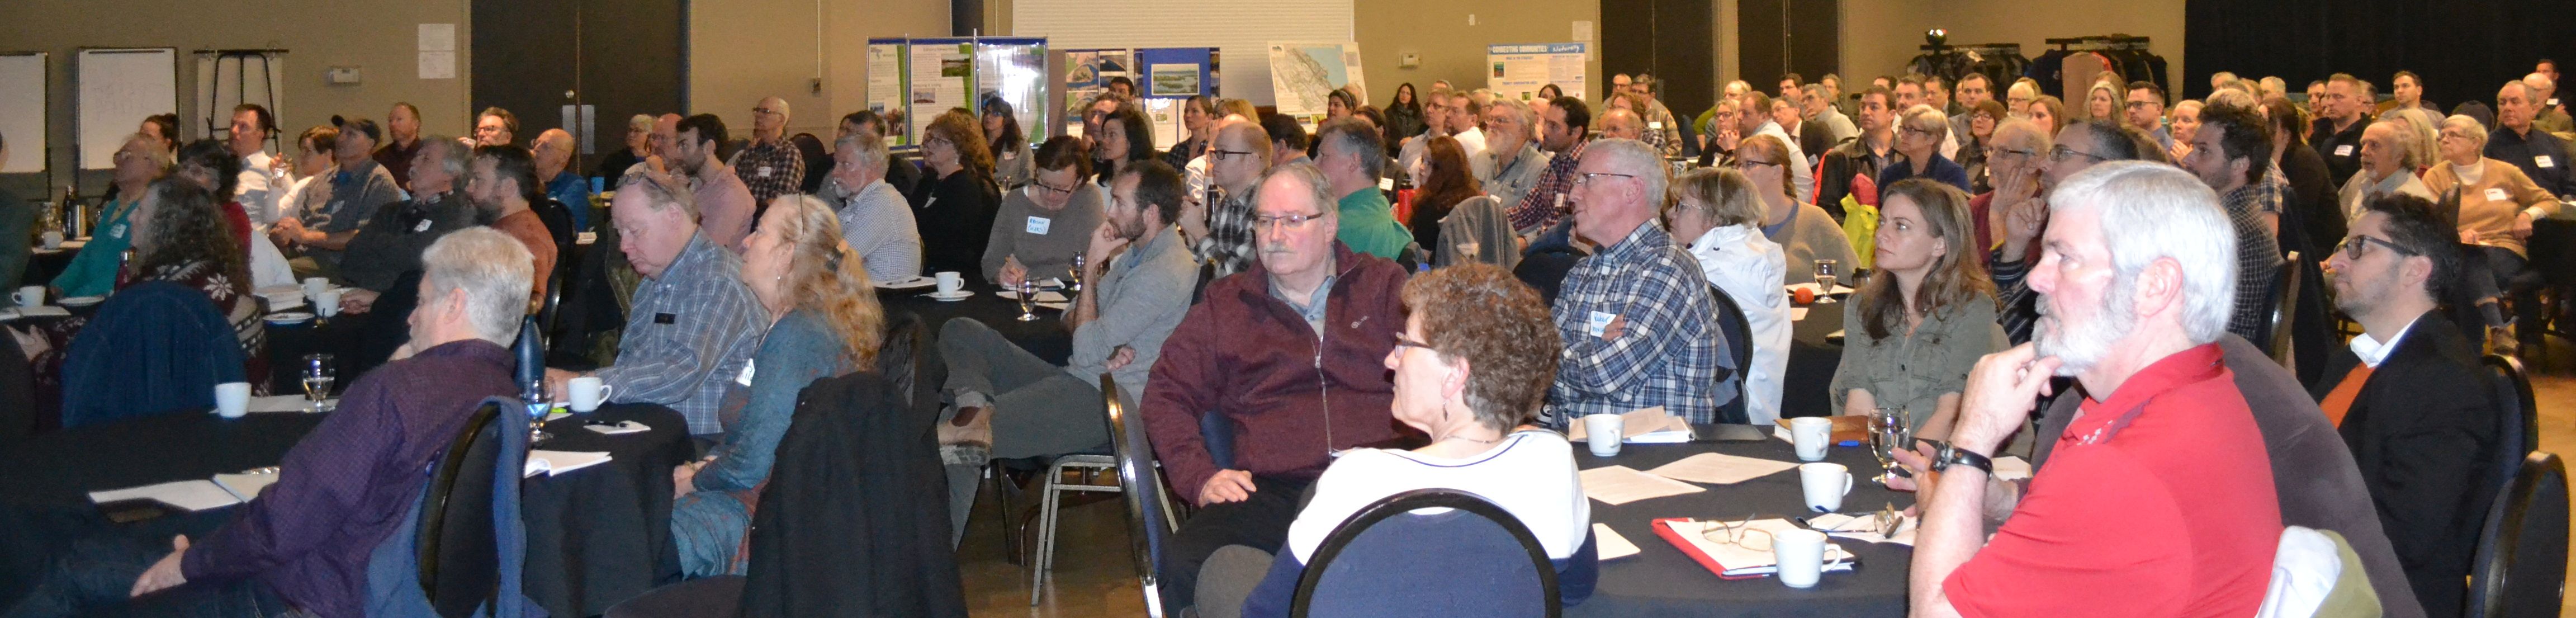 Capacity crowd for the Comox Valley Eco-Asset Symposium, held at the Filberg Centre in the City of Courtenay on Vancouver Island